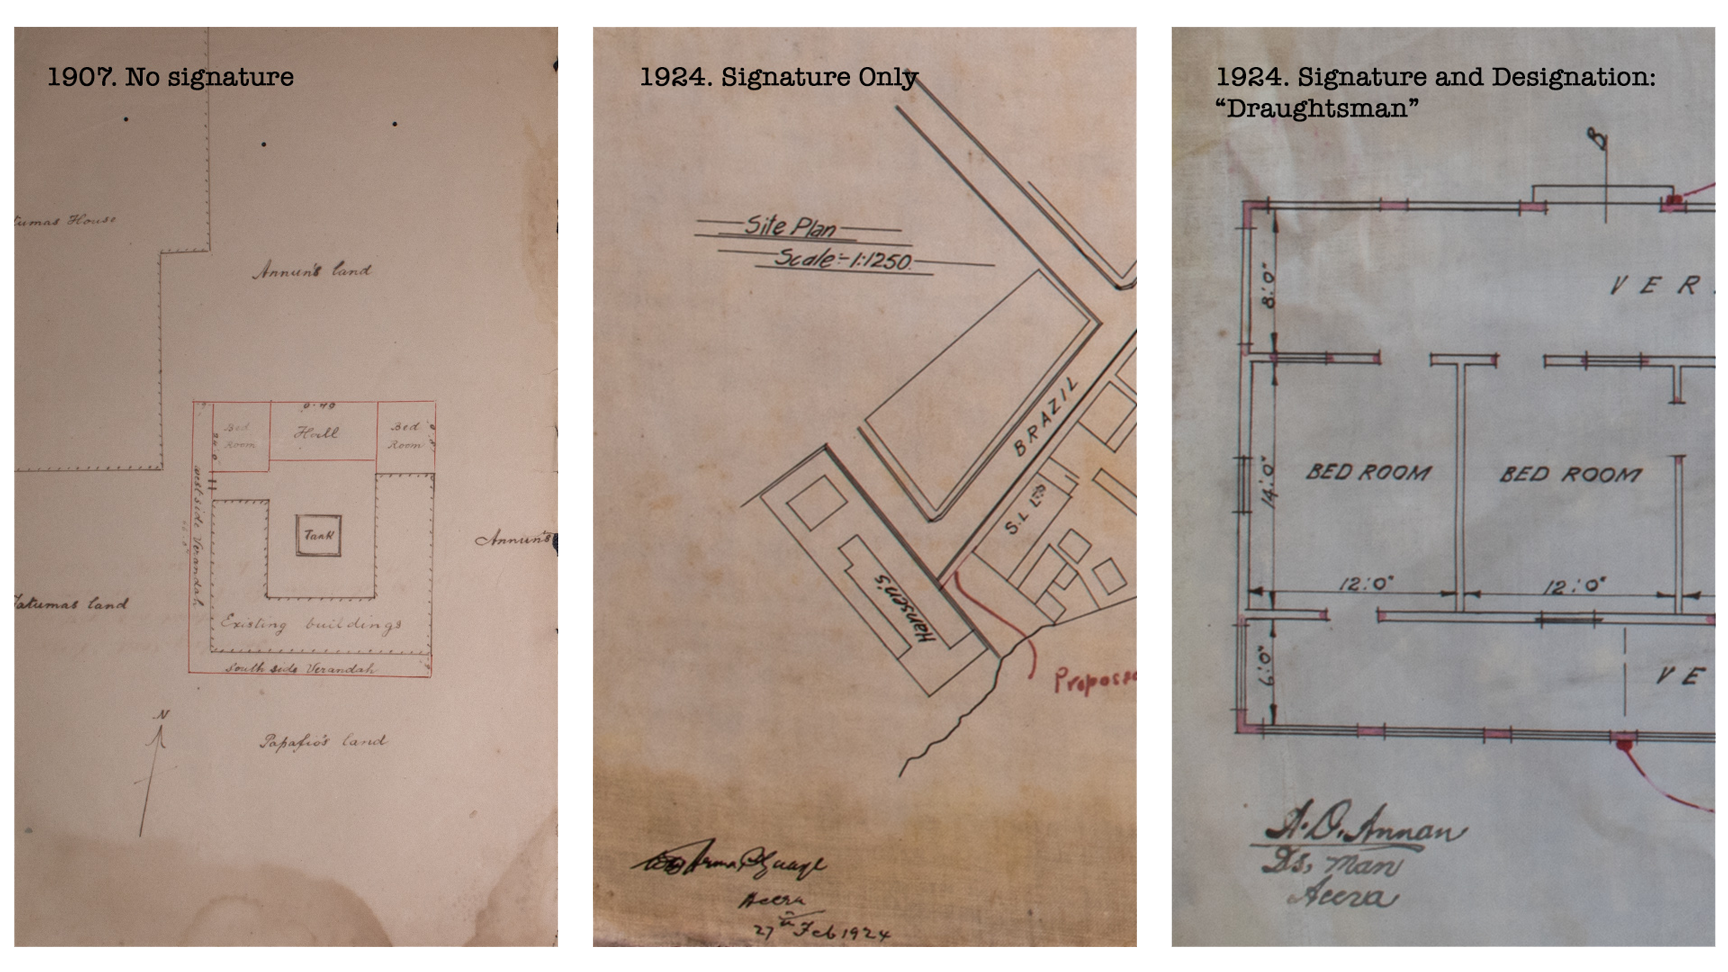 Figure 5. Three drawings showing signature progression, 1935. Accra Archive, Accra, Ghana